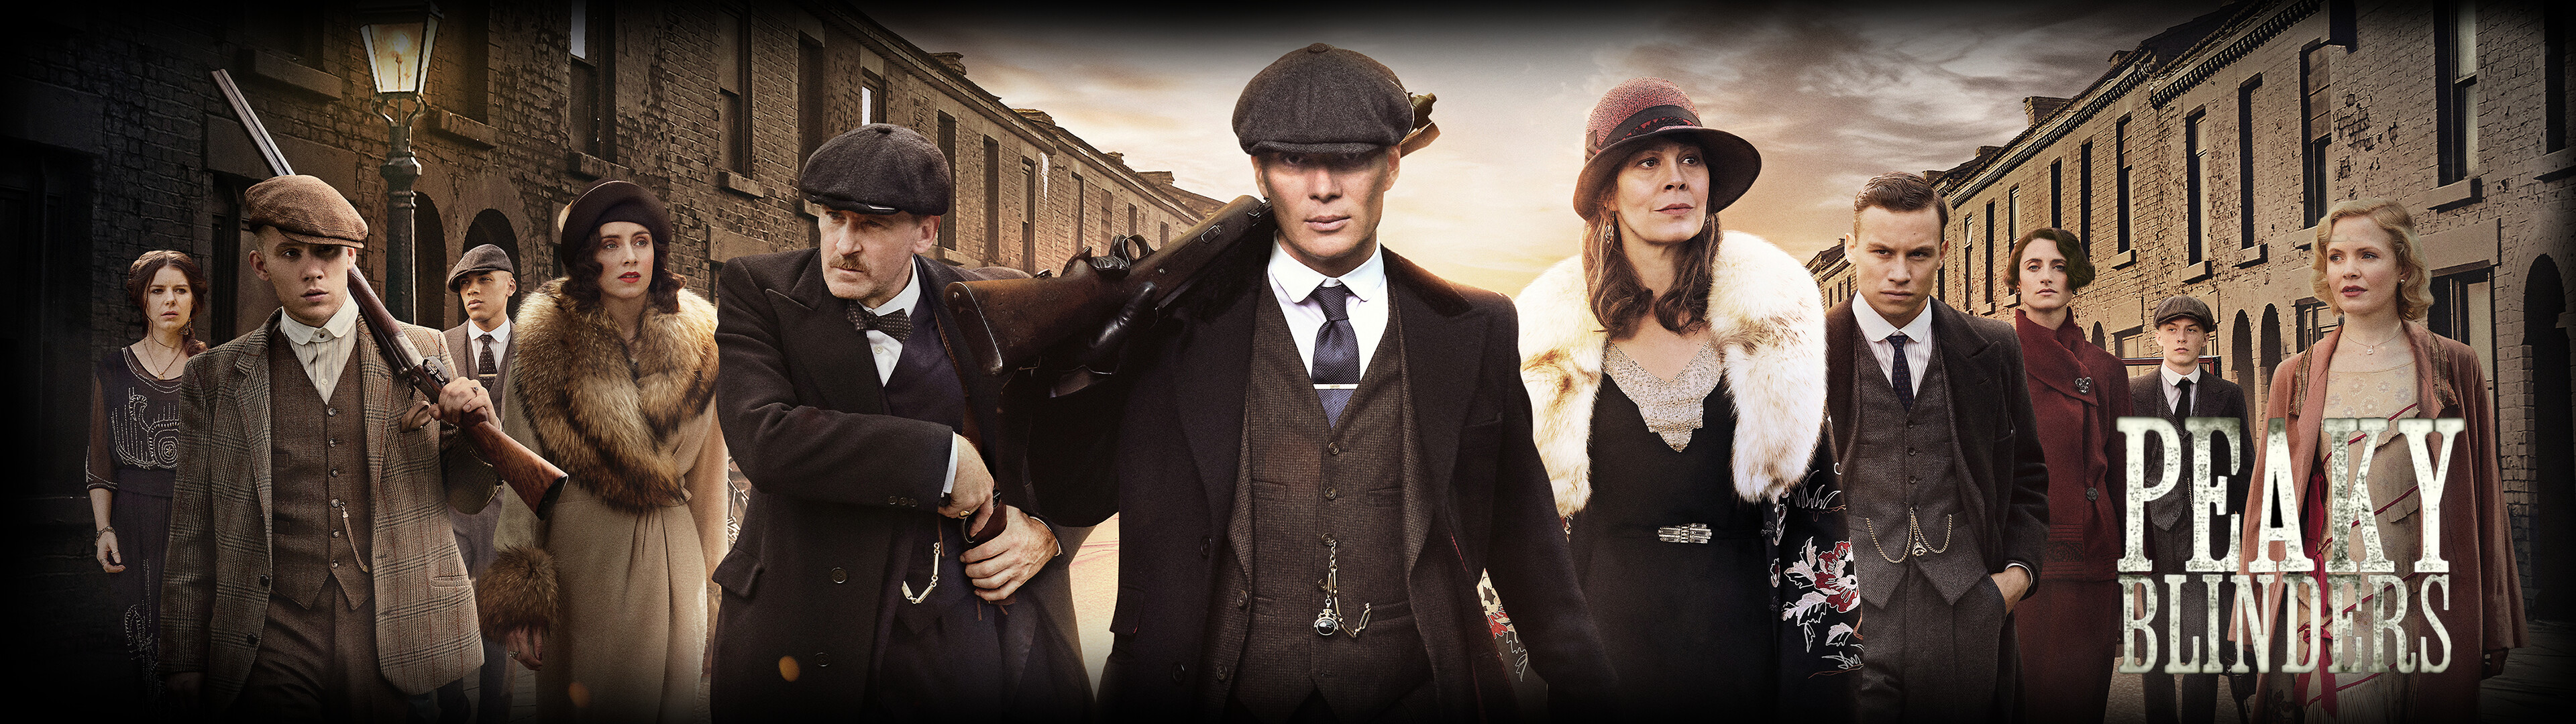 Peaky Blinders: Shelby family, a small and wealthy family of Irish-Traveller descent. 3840x1080 Dual Screen Background.